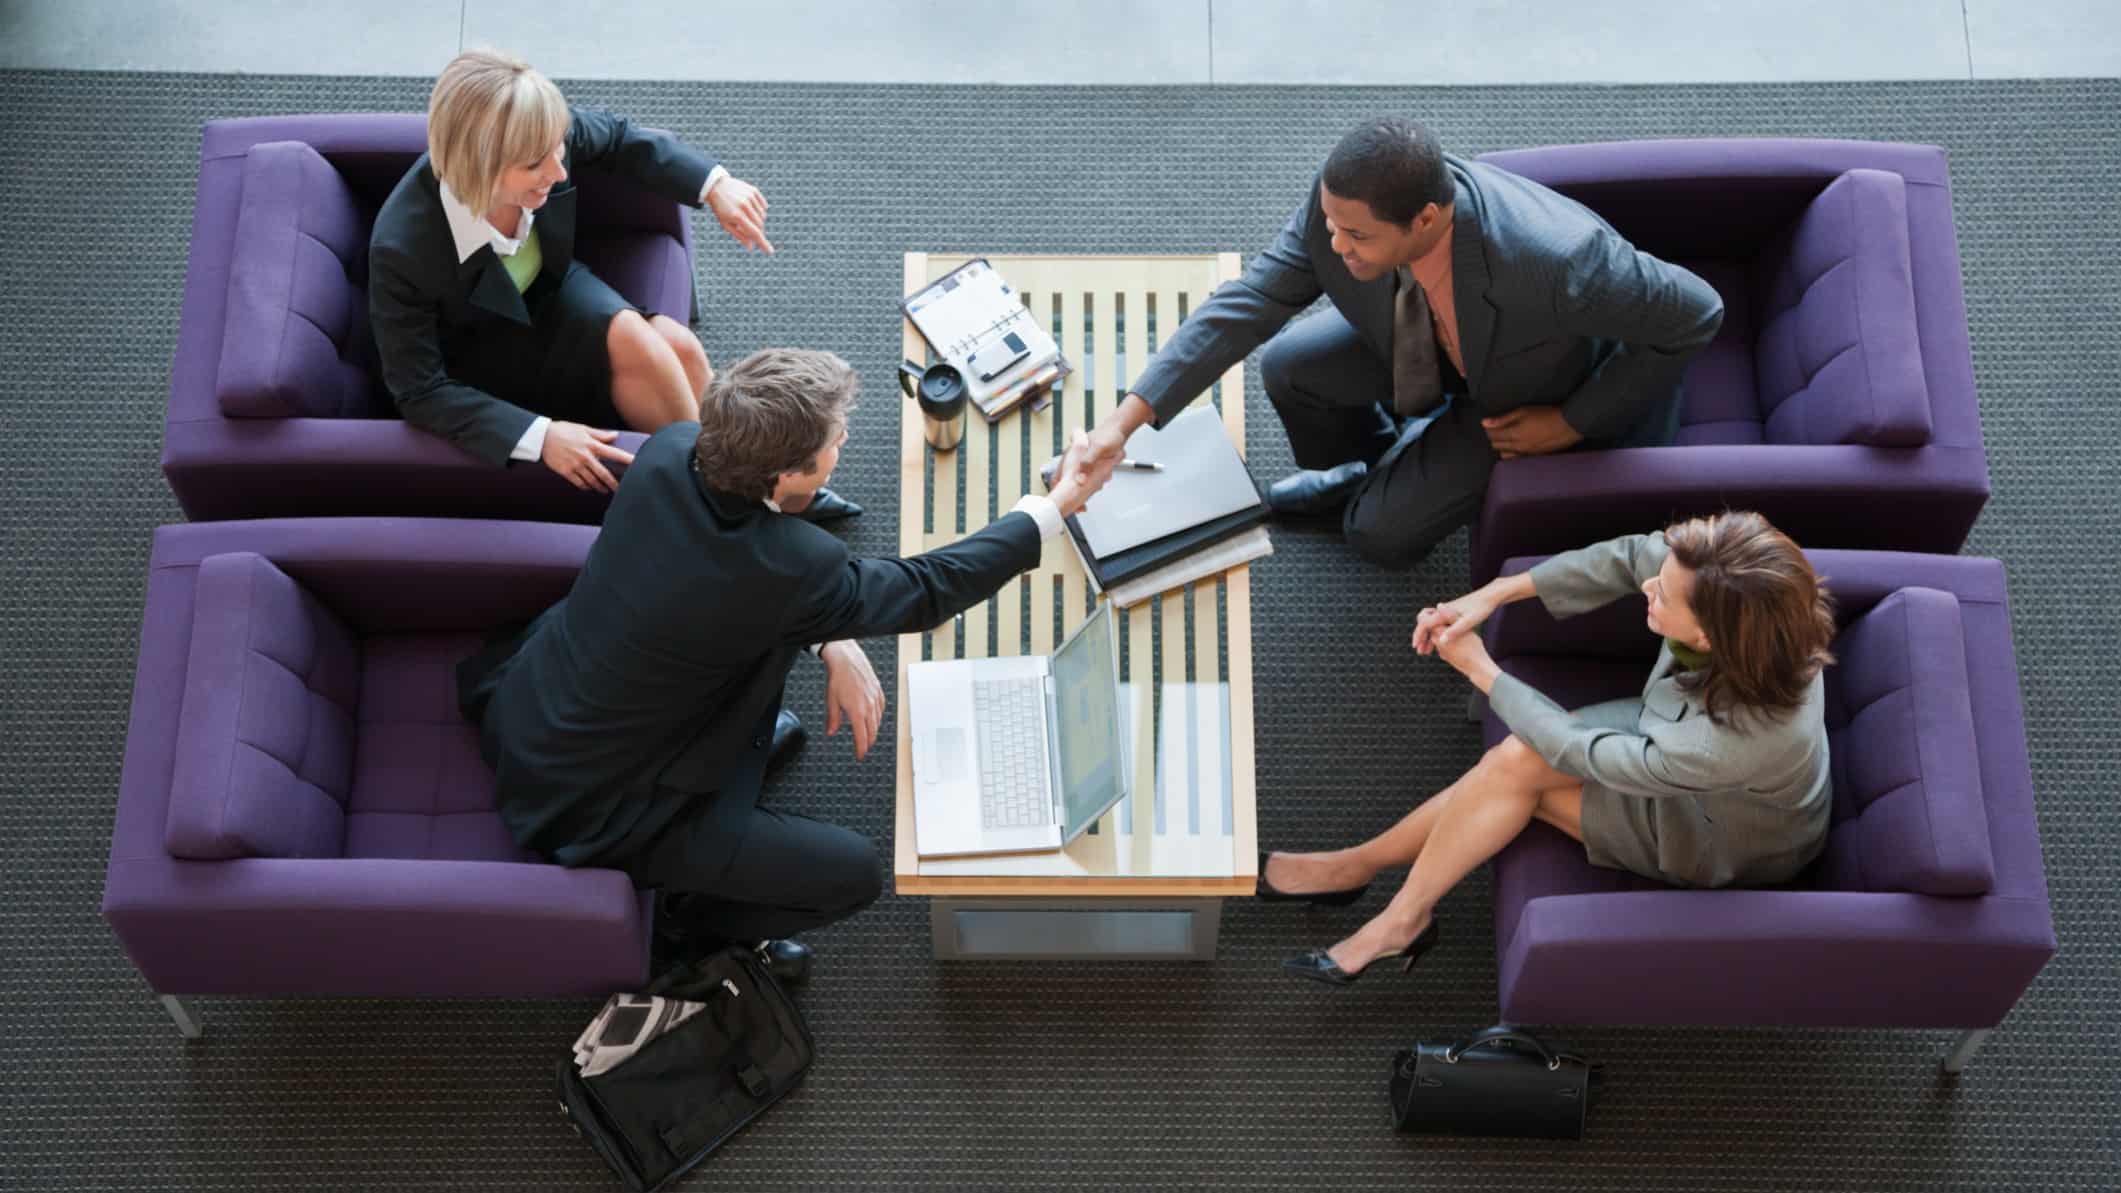 A group of business executives shake hands in an airport lounge.